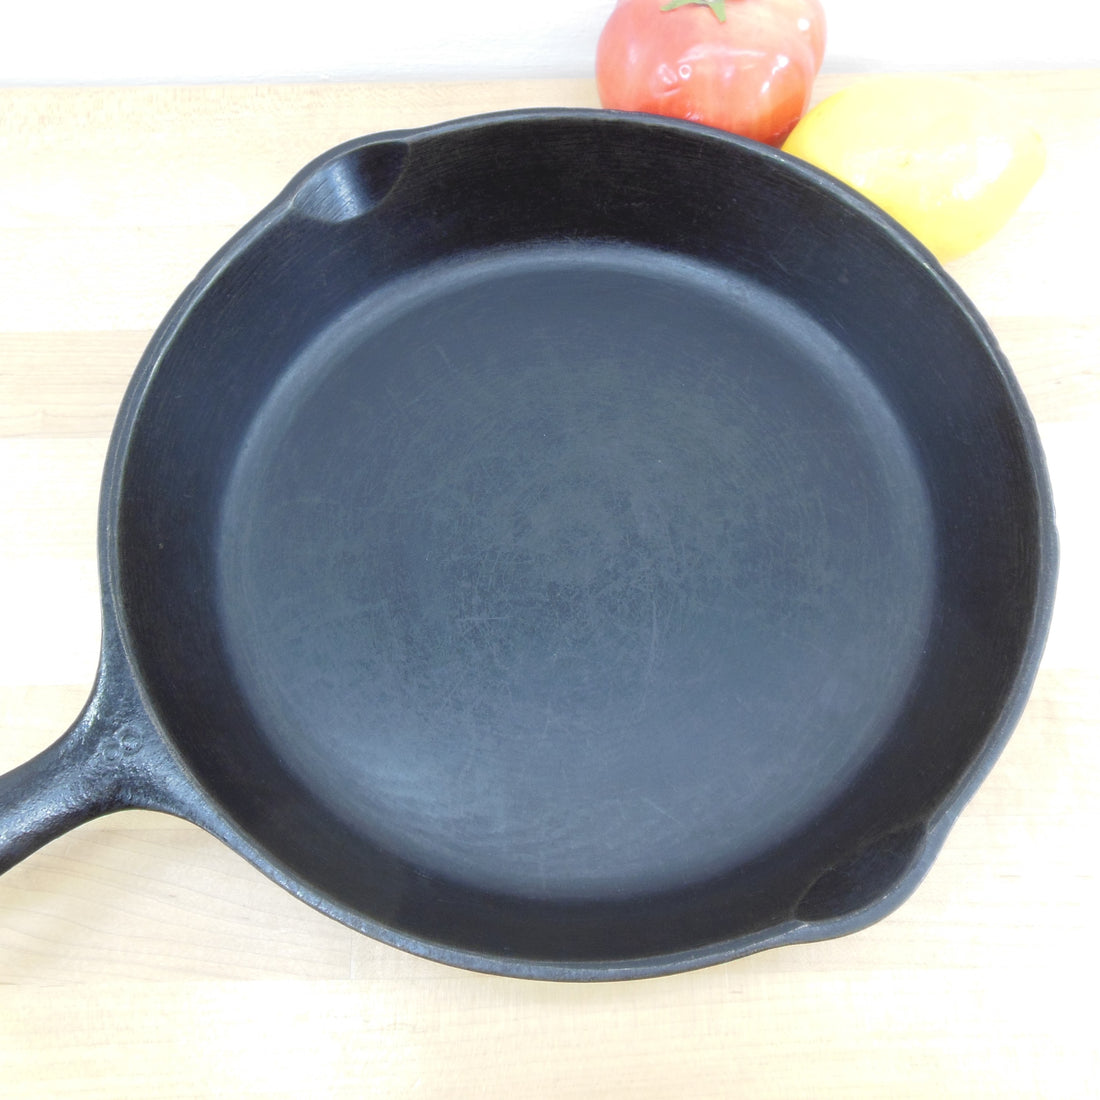 Grandma's Wagner Cast Iron Skillet Second Update From 2016 Blog